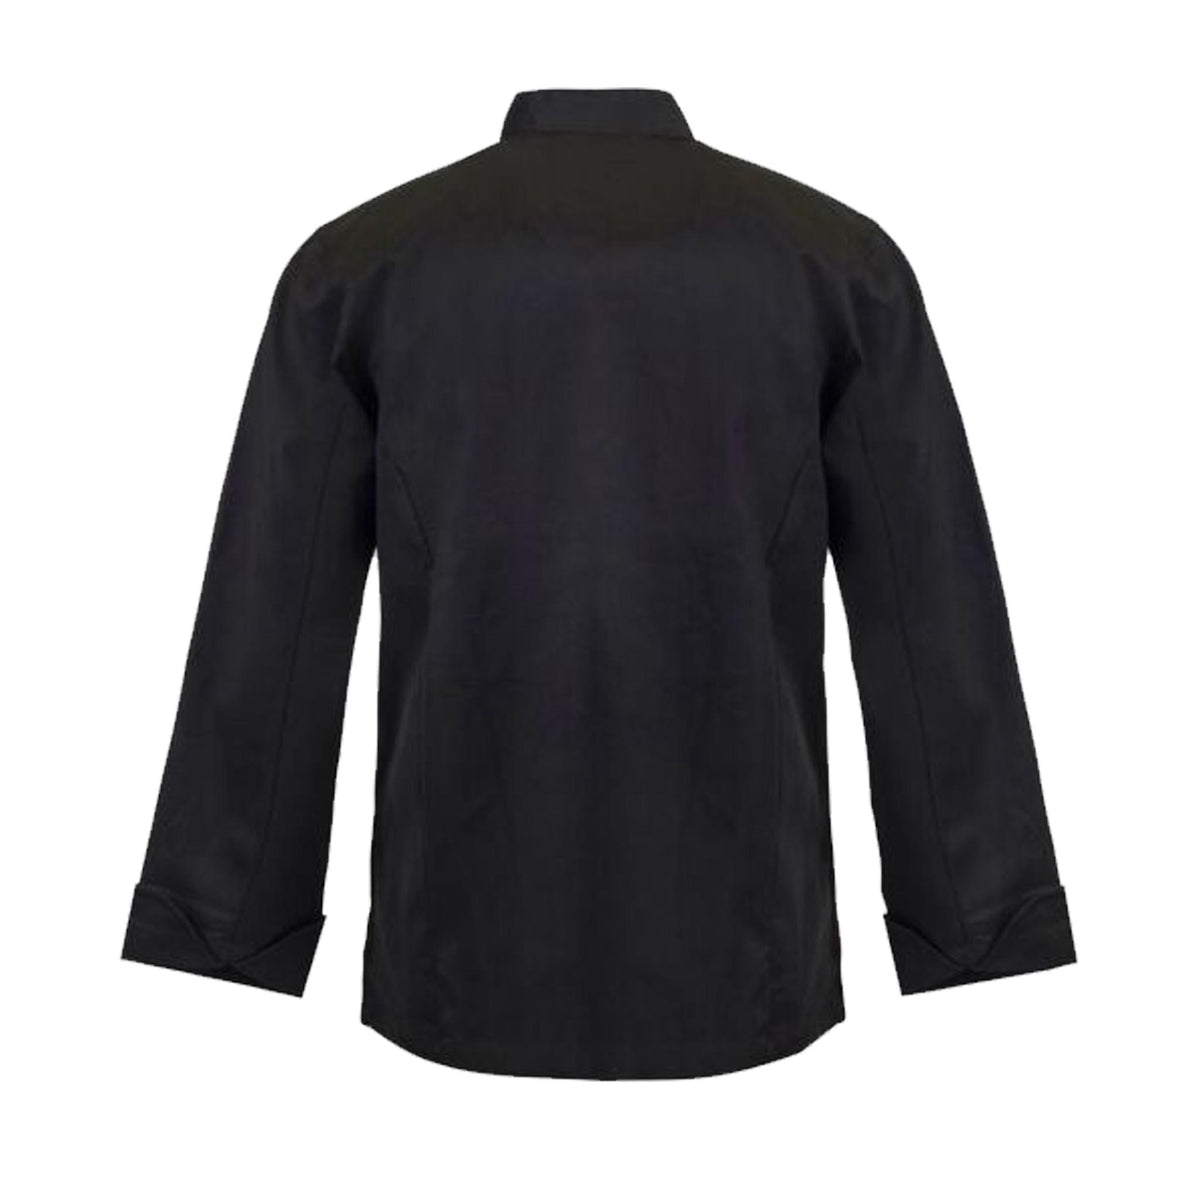 executive long sleeve chefs jacket in black back view